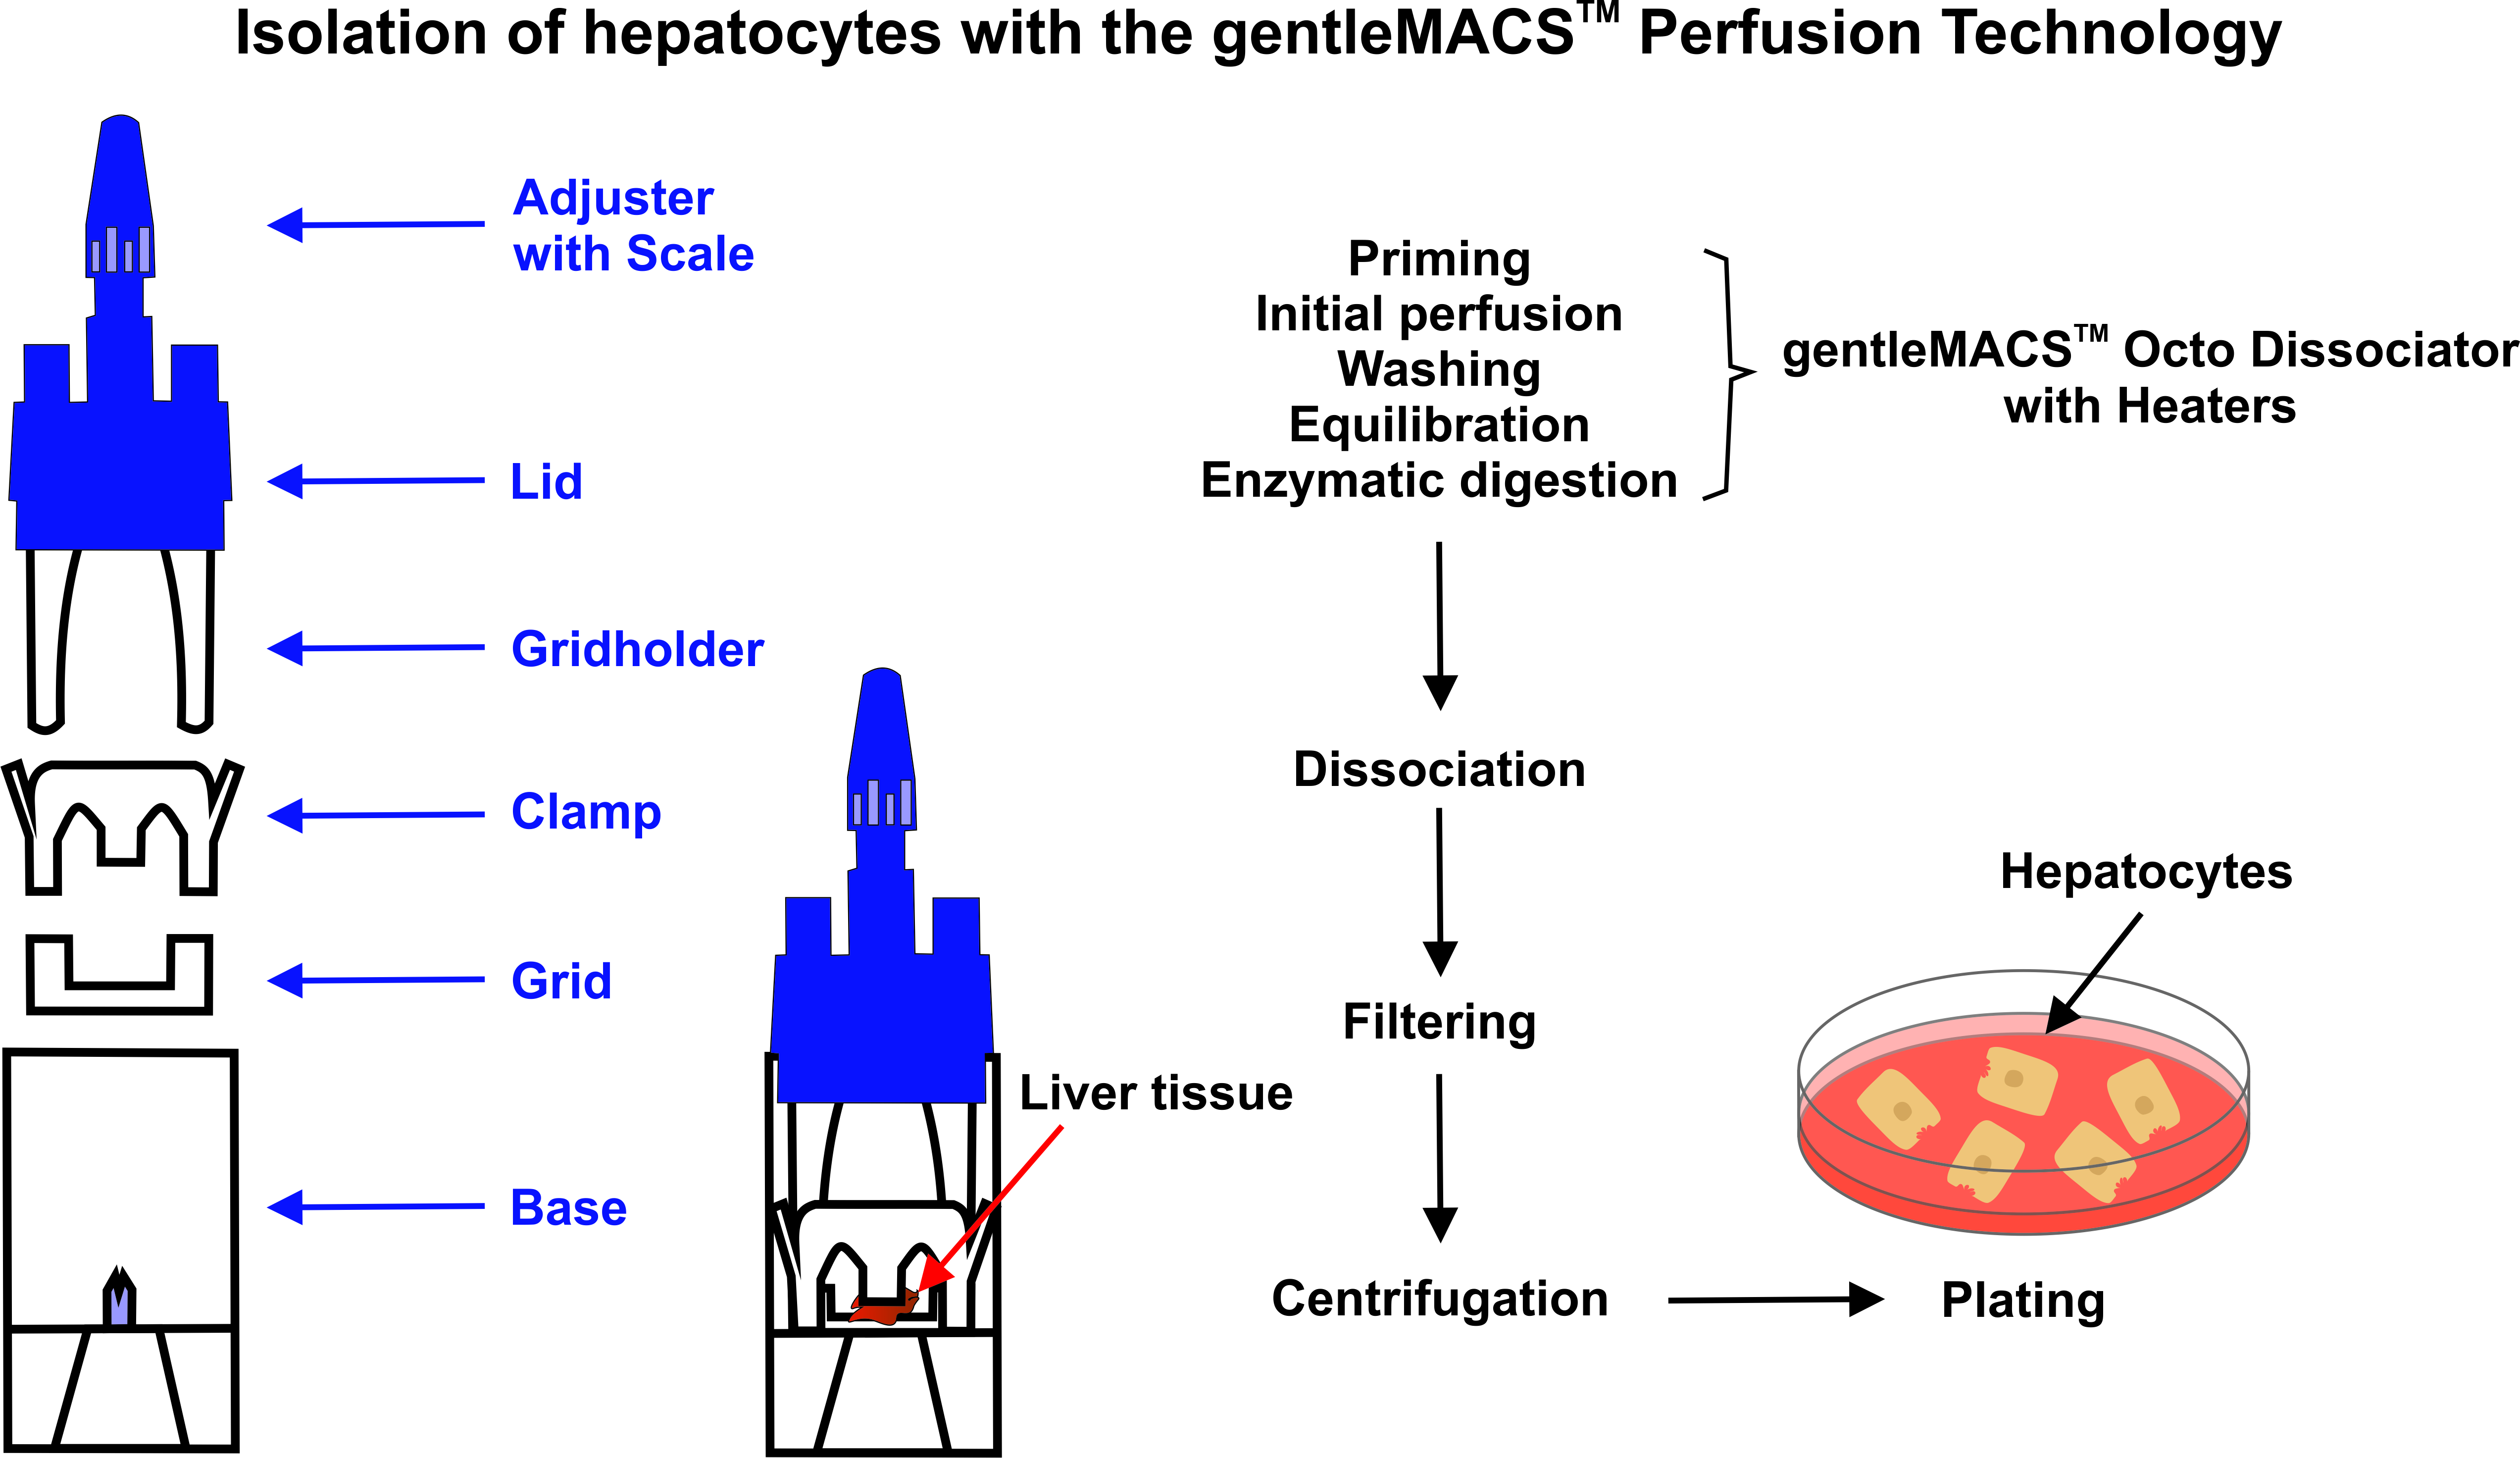 Biomedicines | Free Full-Text | Isolation of Hepatocytes from Liver Tissue  by a Novel, Semi-Automated Perfusion Technology | HTML